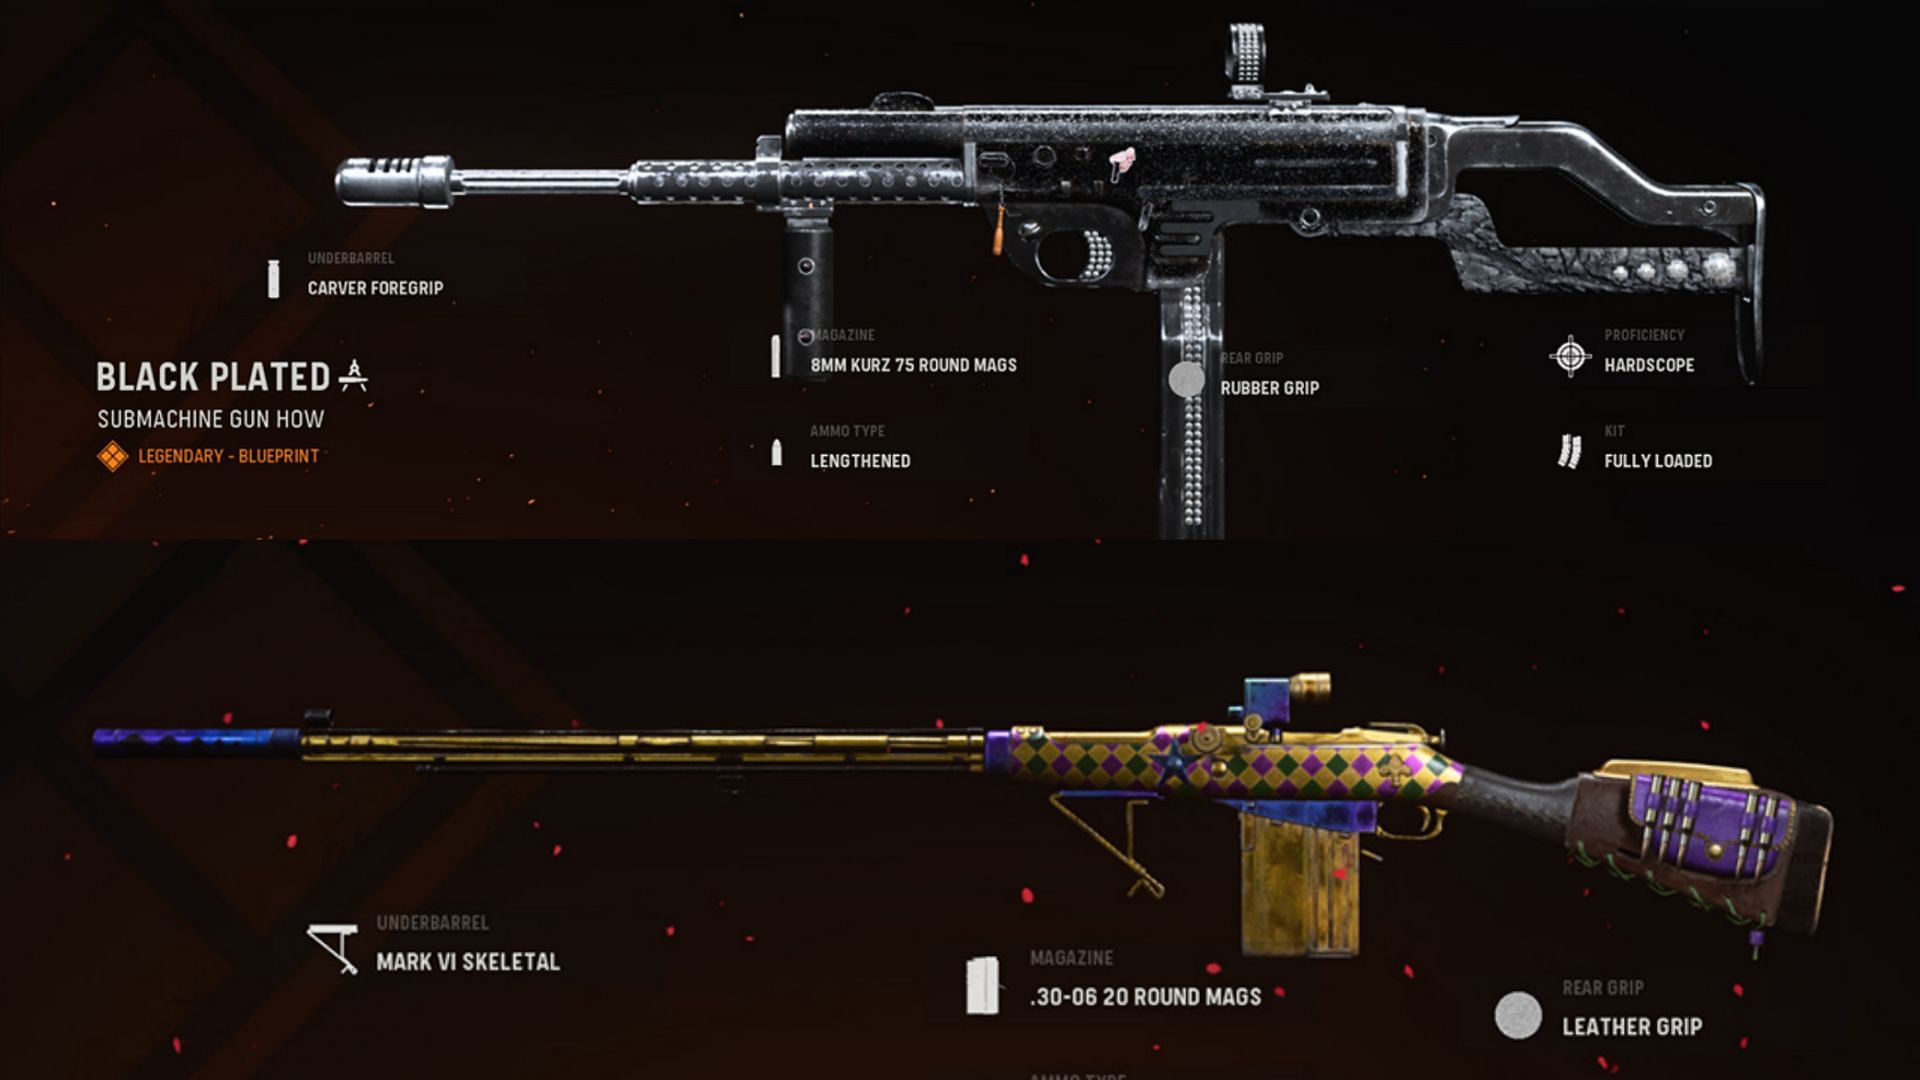 Some available blueprints for Armaguerra 43 and 3-Line Rifle in-game (Image via Warzone / Activision)